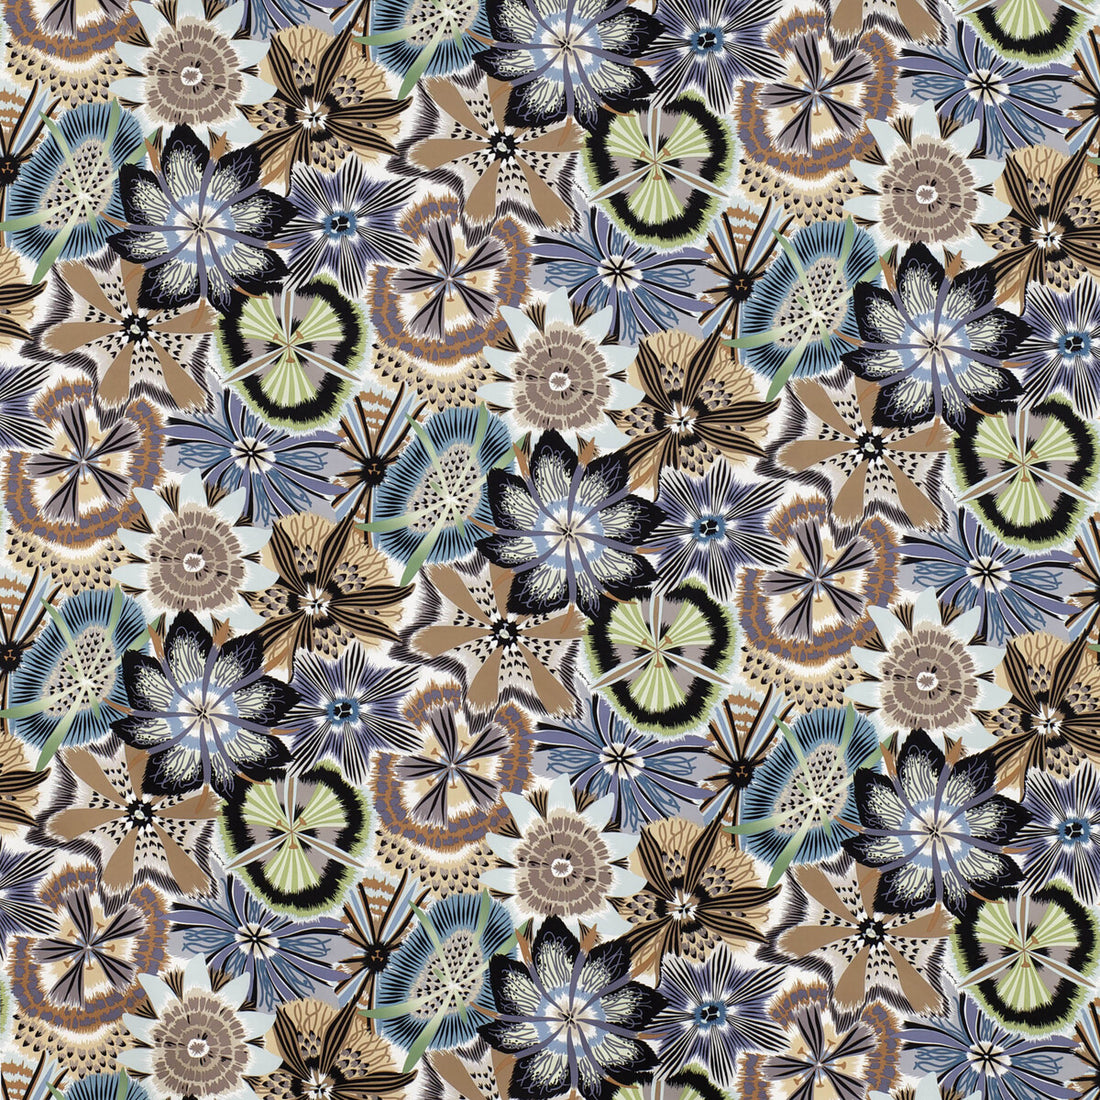 Passiflora fabric in t60 color - pattern 36181.615.0 - by Kravet Couture in the Missoni Home collection